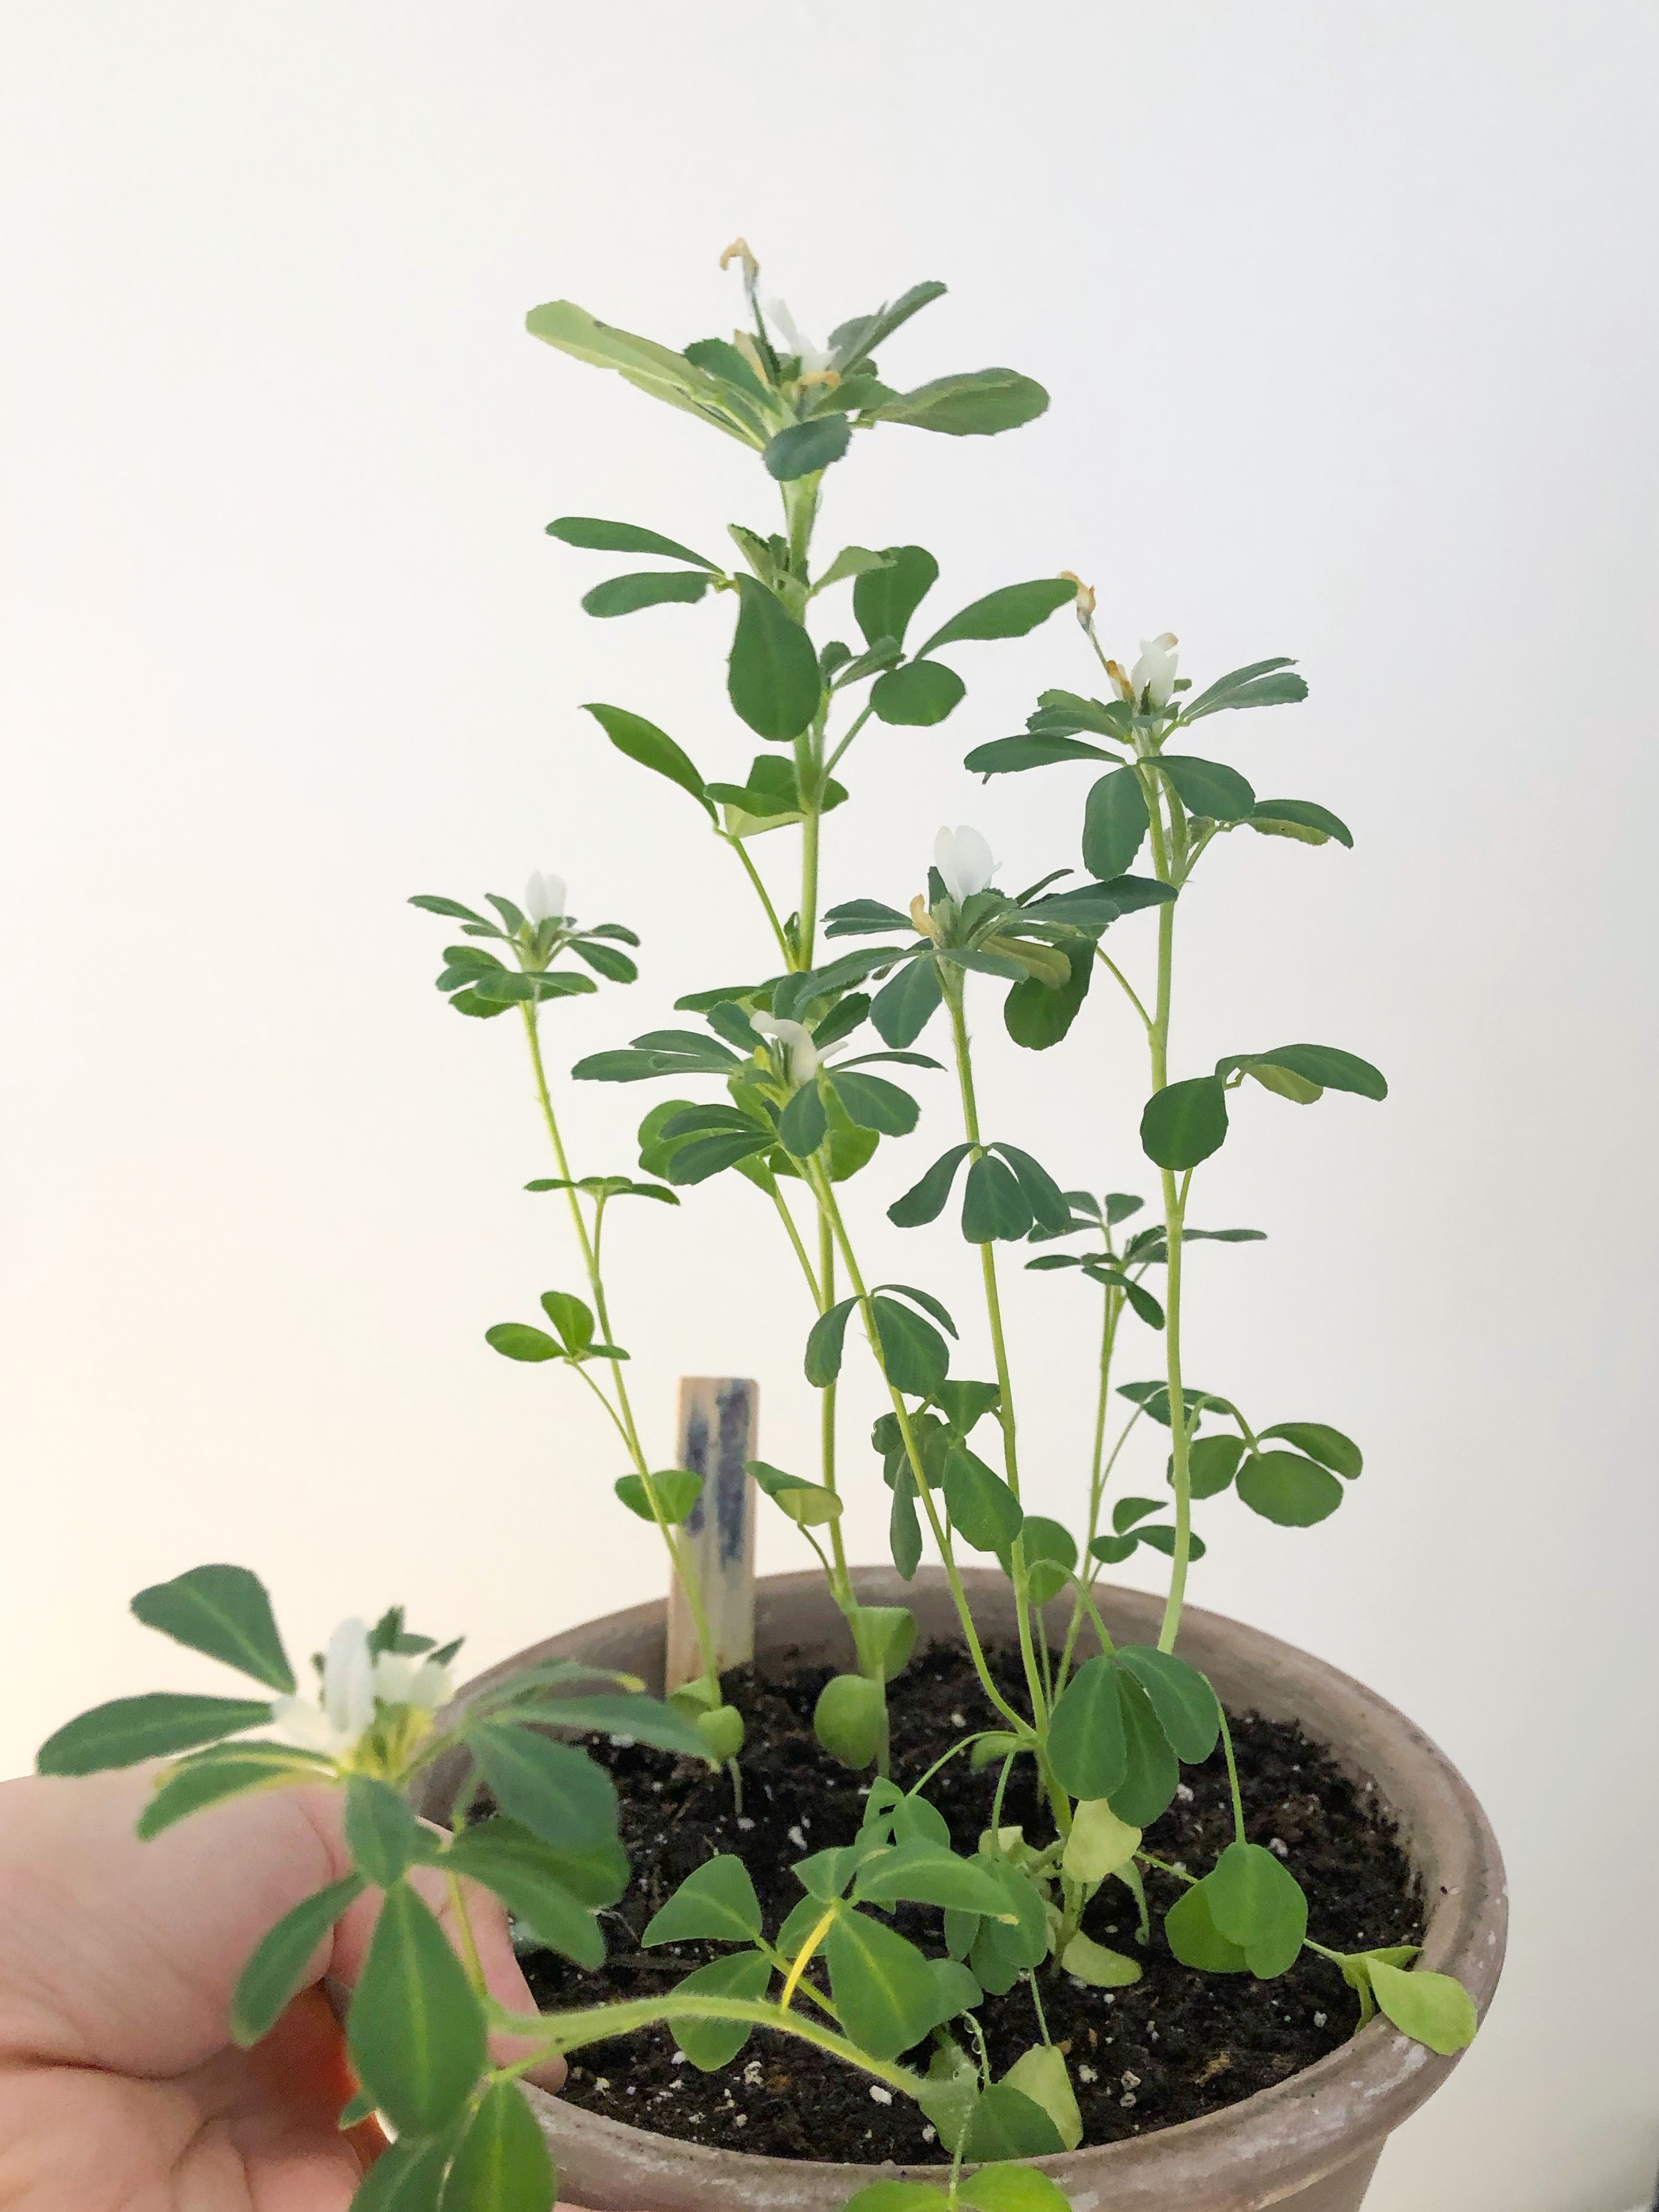 Growing fenugreek plant at home